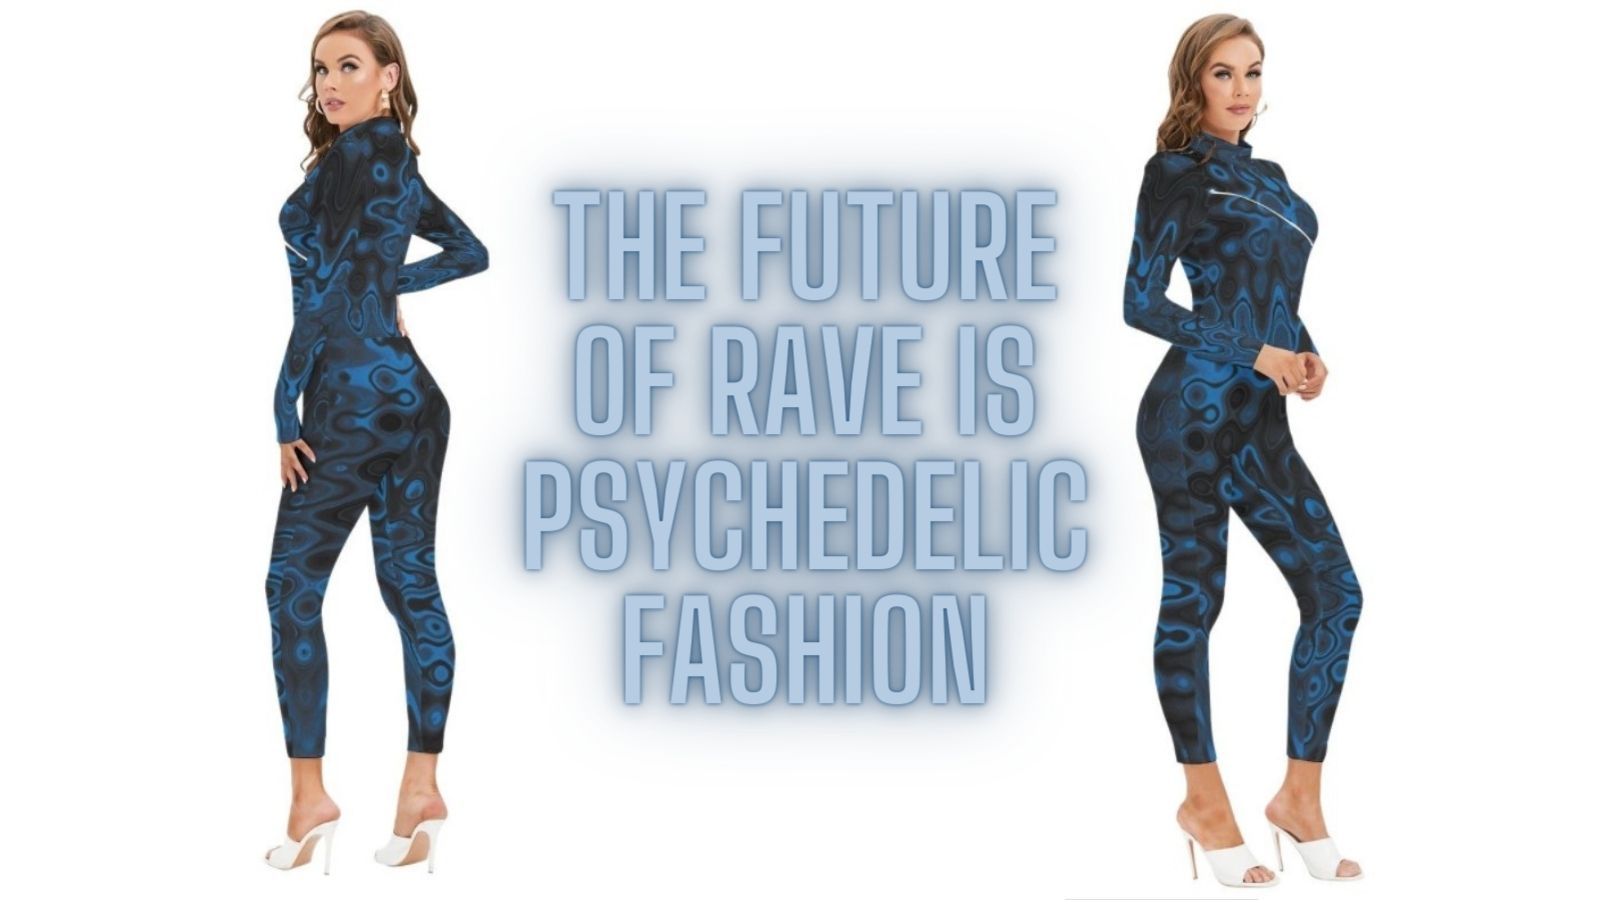 The Future of Rave is Psychedelic Fashion